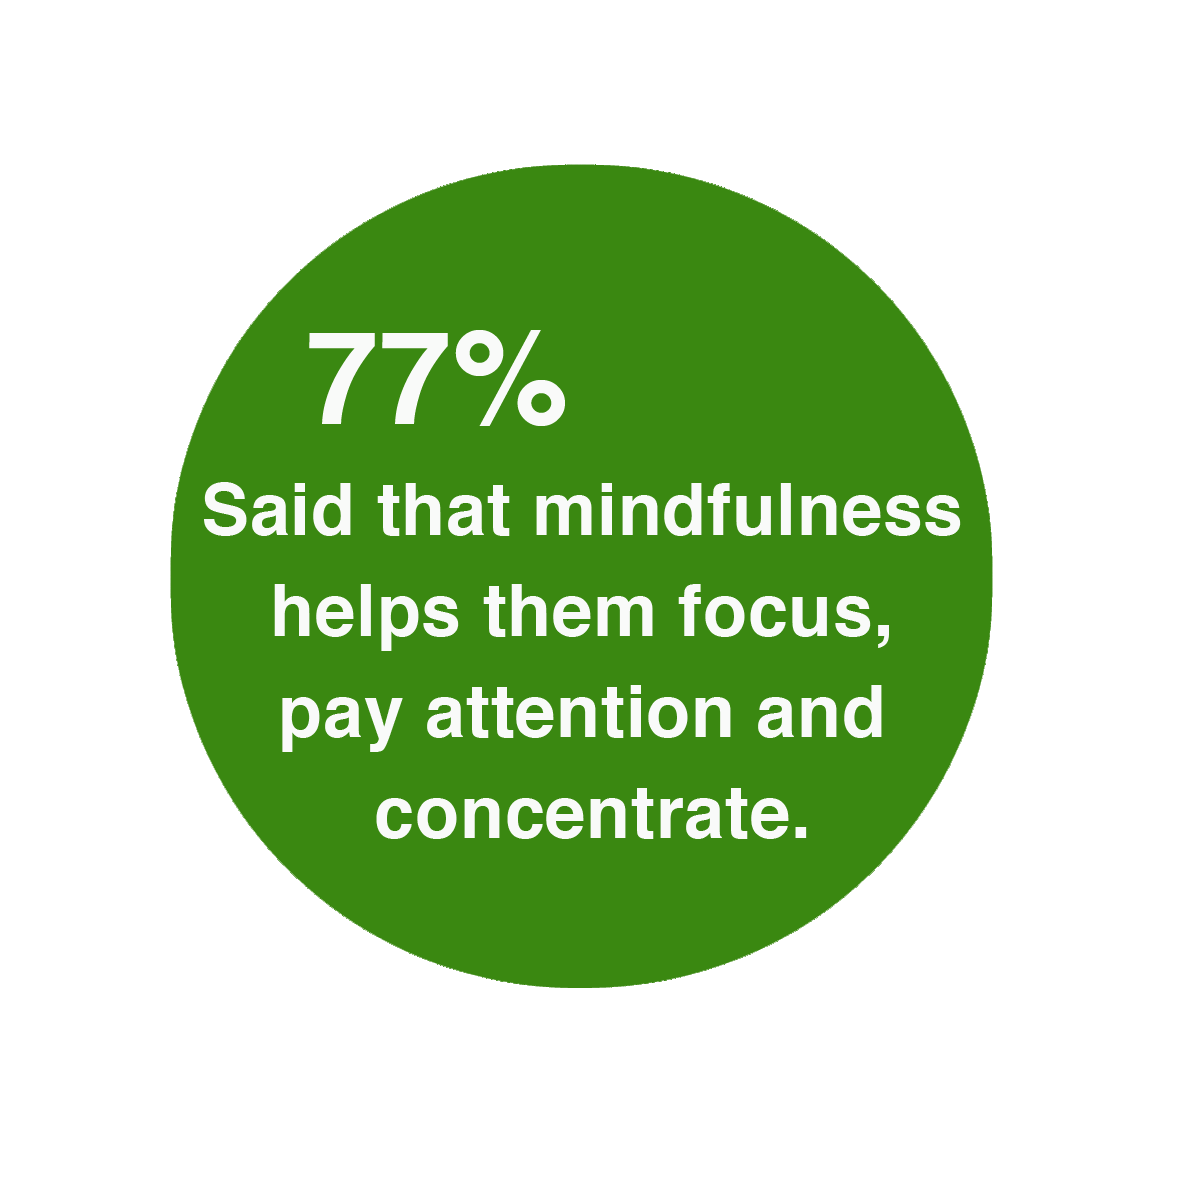 77% said that mindfulness helps them focus, pay attention and concentrate.